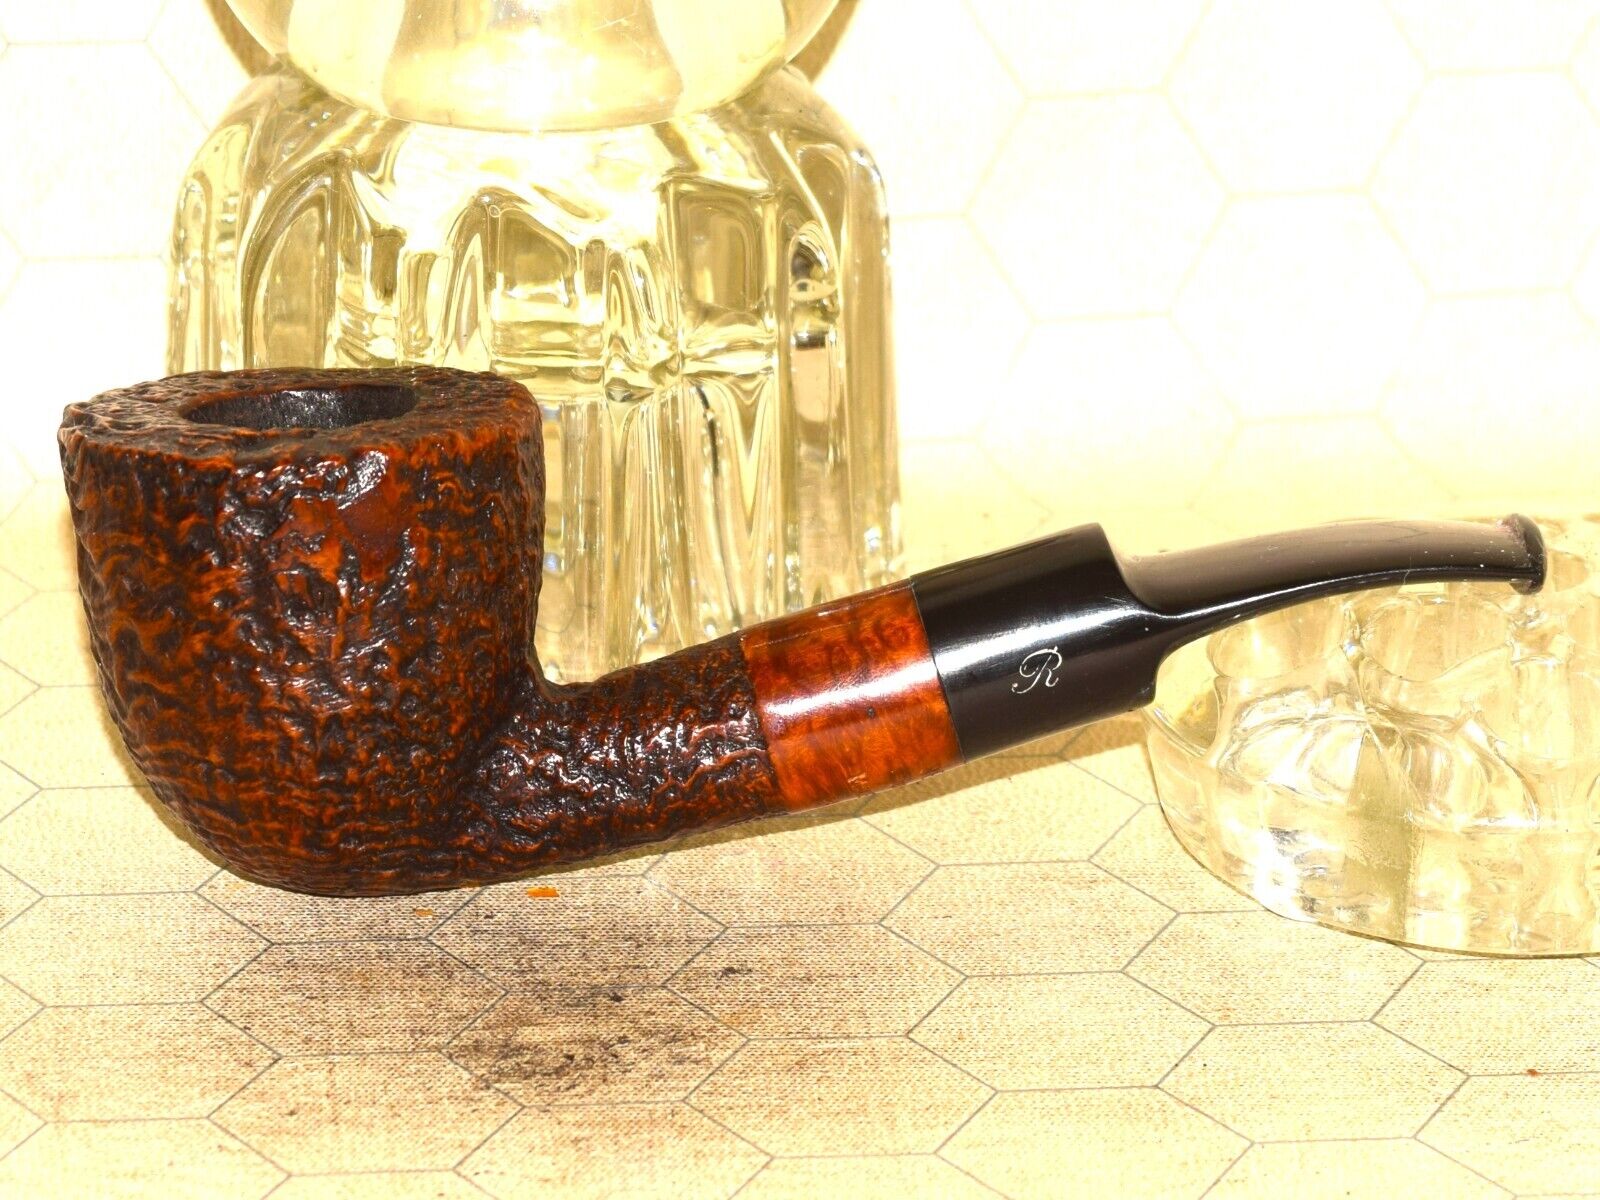 REFJERG SECOND HAND-CARVED MADE IN DENMARK 9mm Filter Tobacco Pipe #B009